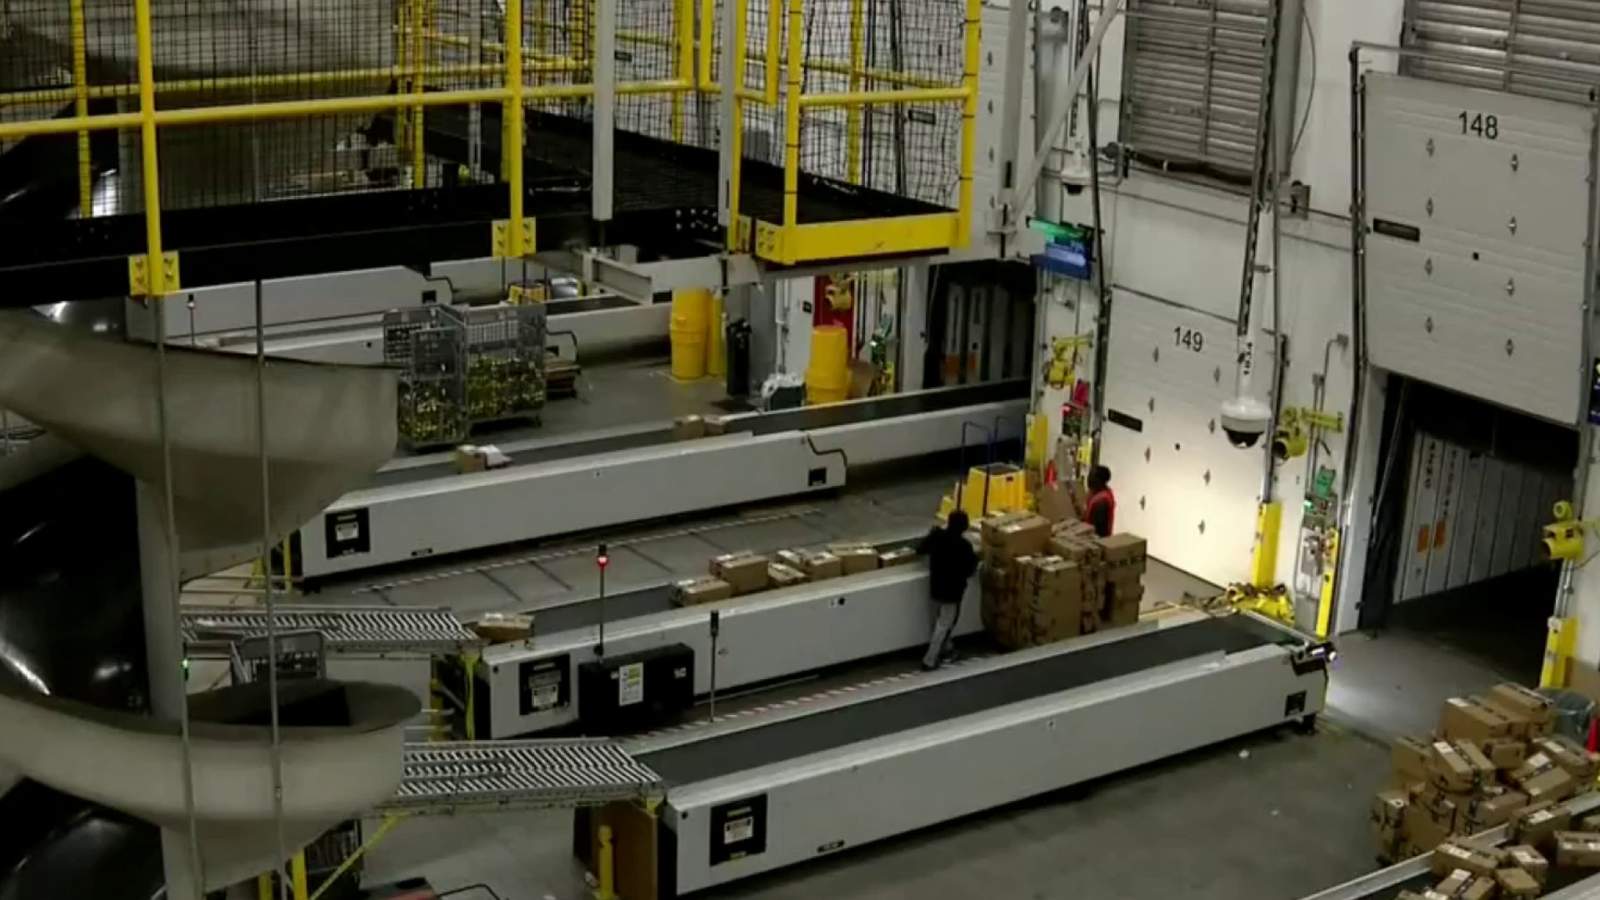 Former Amazon employee claims unsafe conditions at Romulus fulfillment center